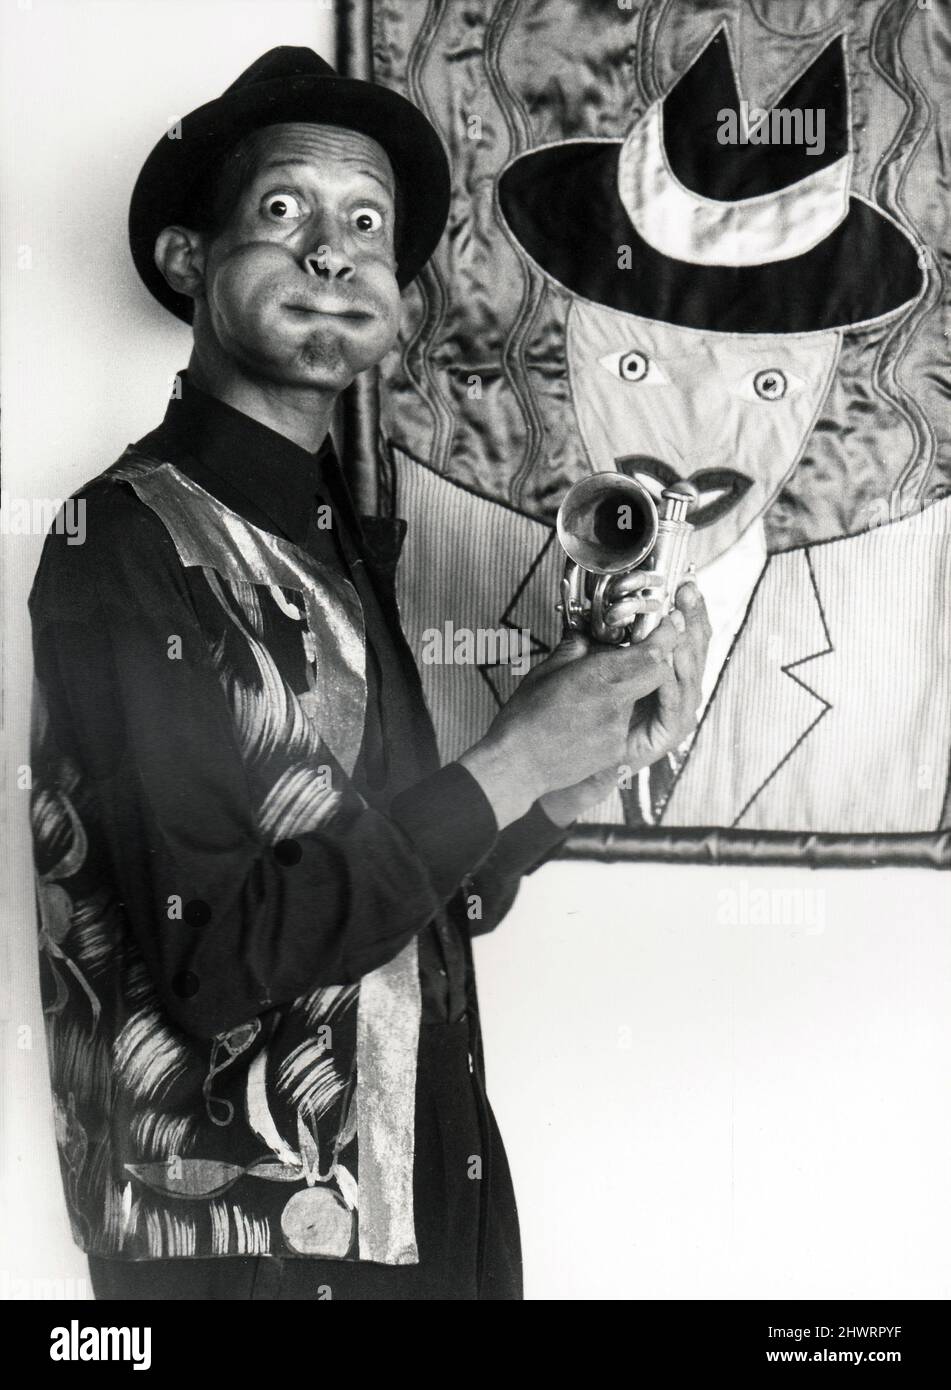 A posed portrait of the late trumpet, jazz musician and pocket trump player Don Cherry in 1983 in Brooklyn, New York. His cheeks are blown out imitating Dizzy Gillespie. I believe the artwork was a portrait of Don by his wife Moki. Stock Photo